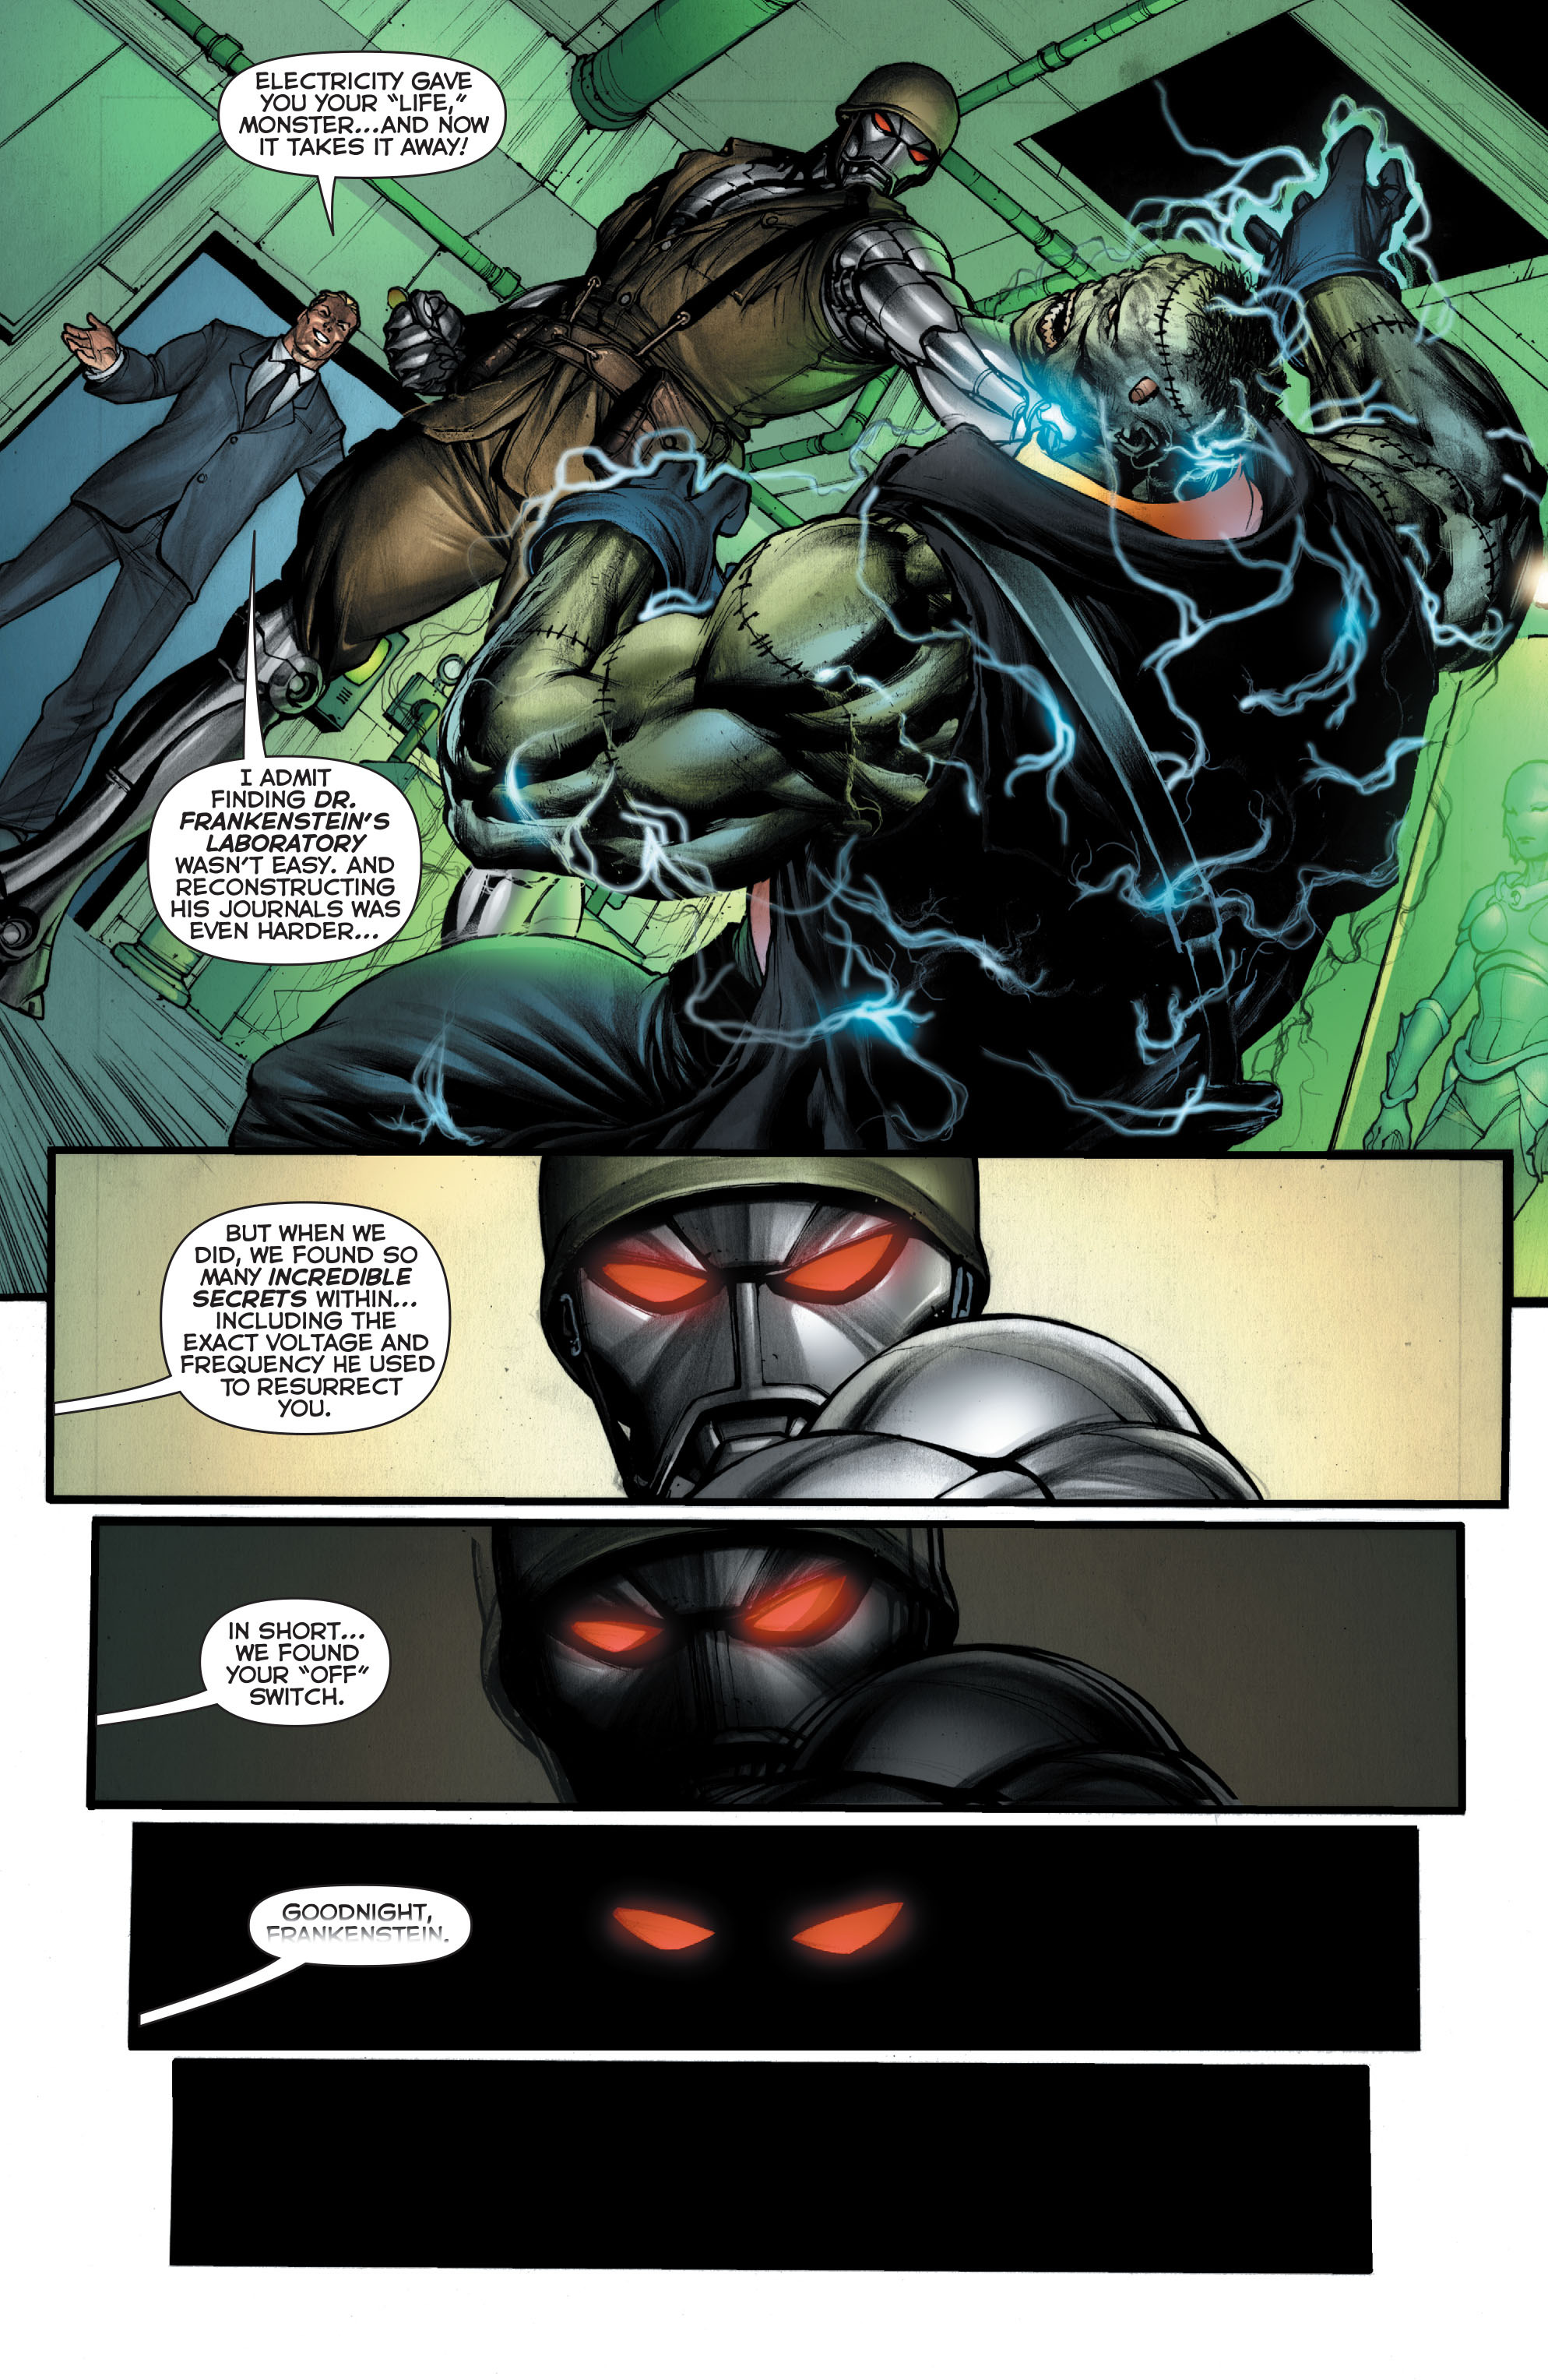 Flashpoint: The World of Flashpoint Featuring Green Lantern Full #1 - English 74